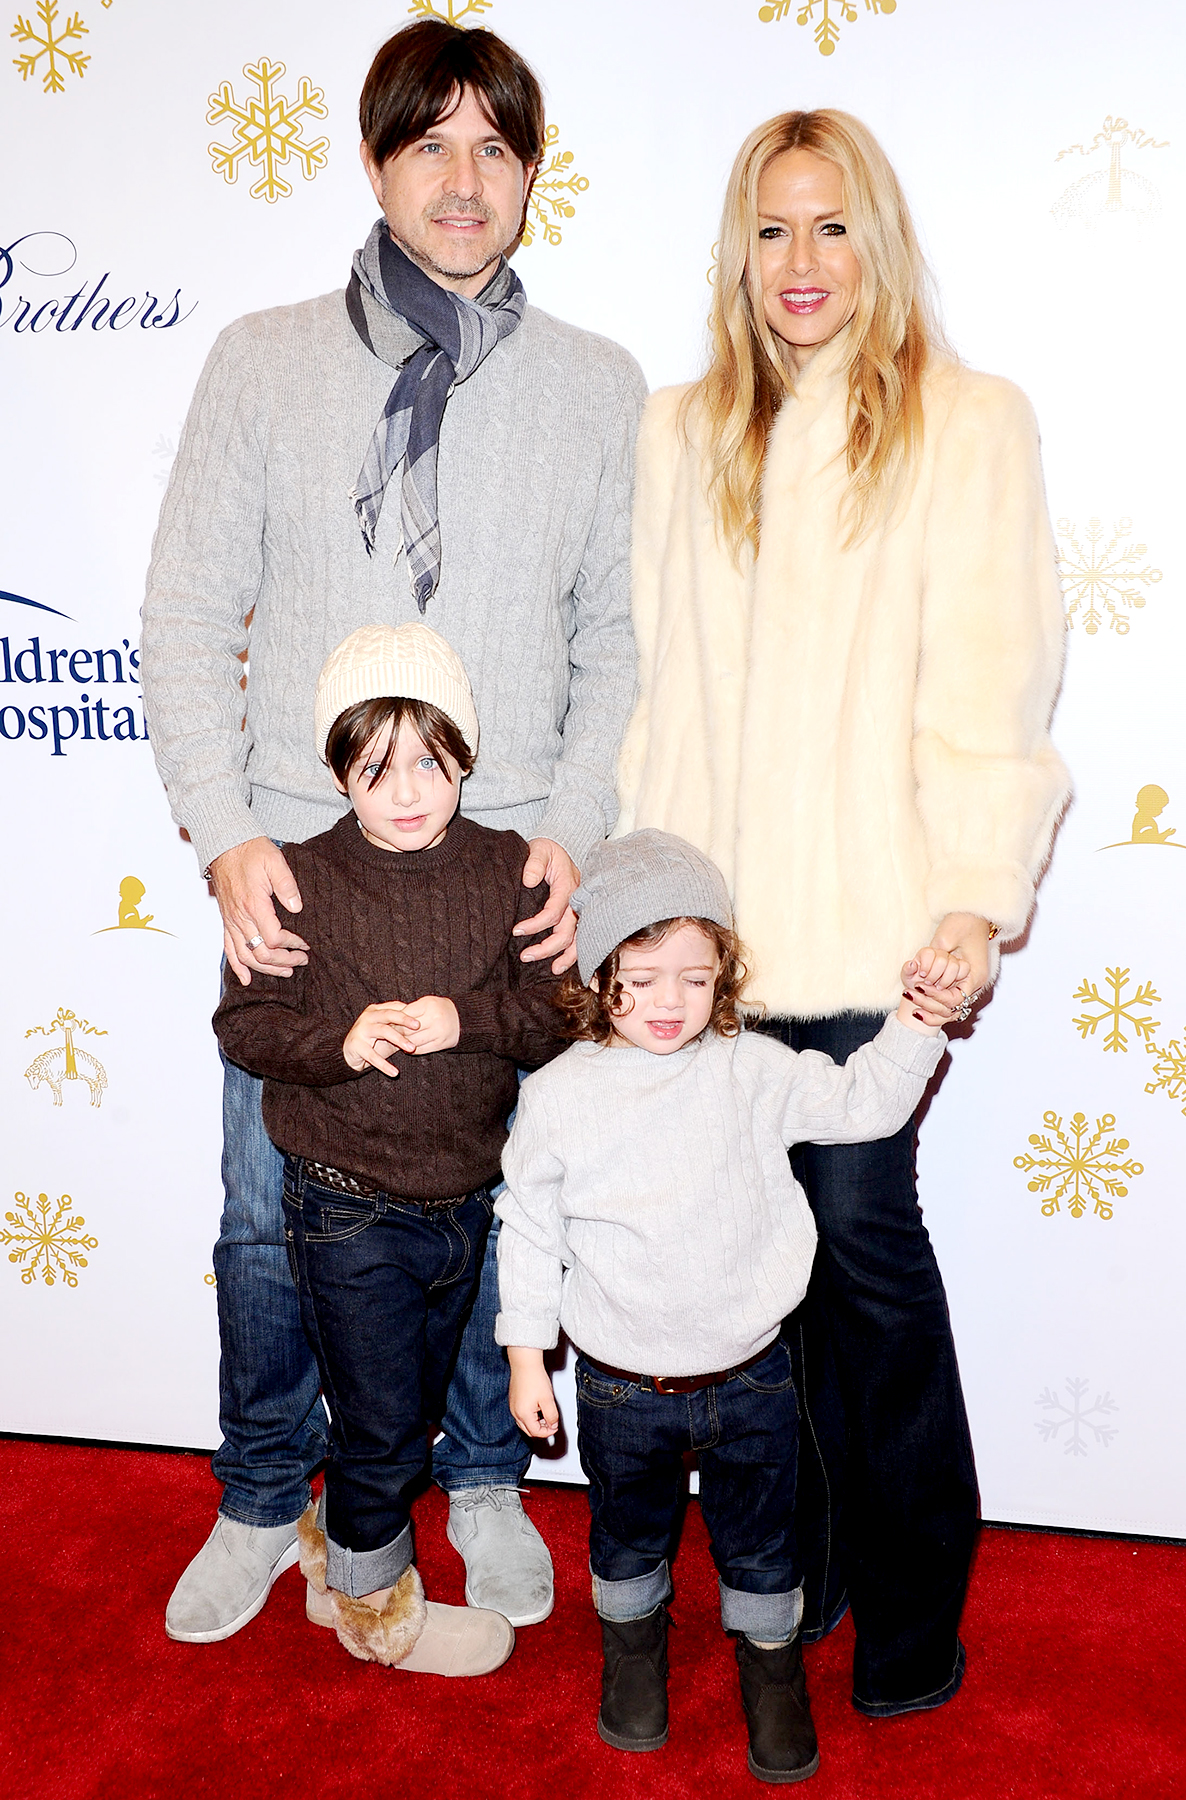 Rachel Zoe Shares Back-to-School Tips for Moms and Kids